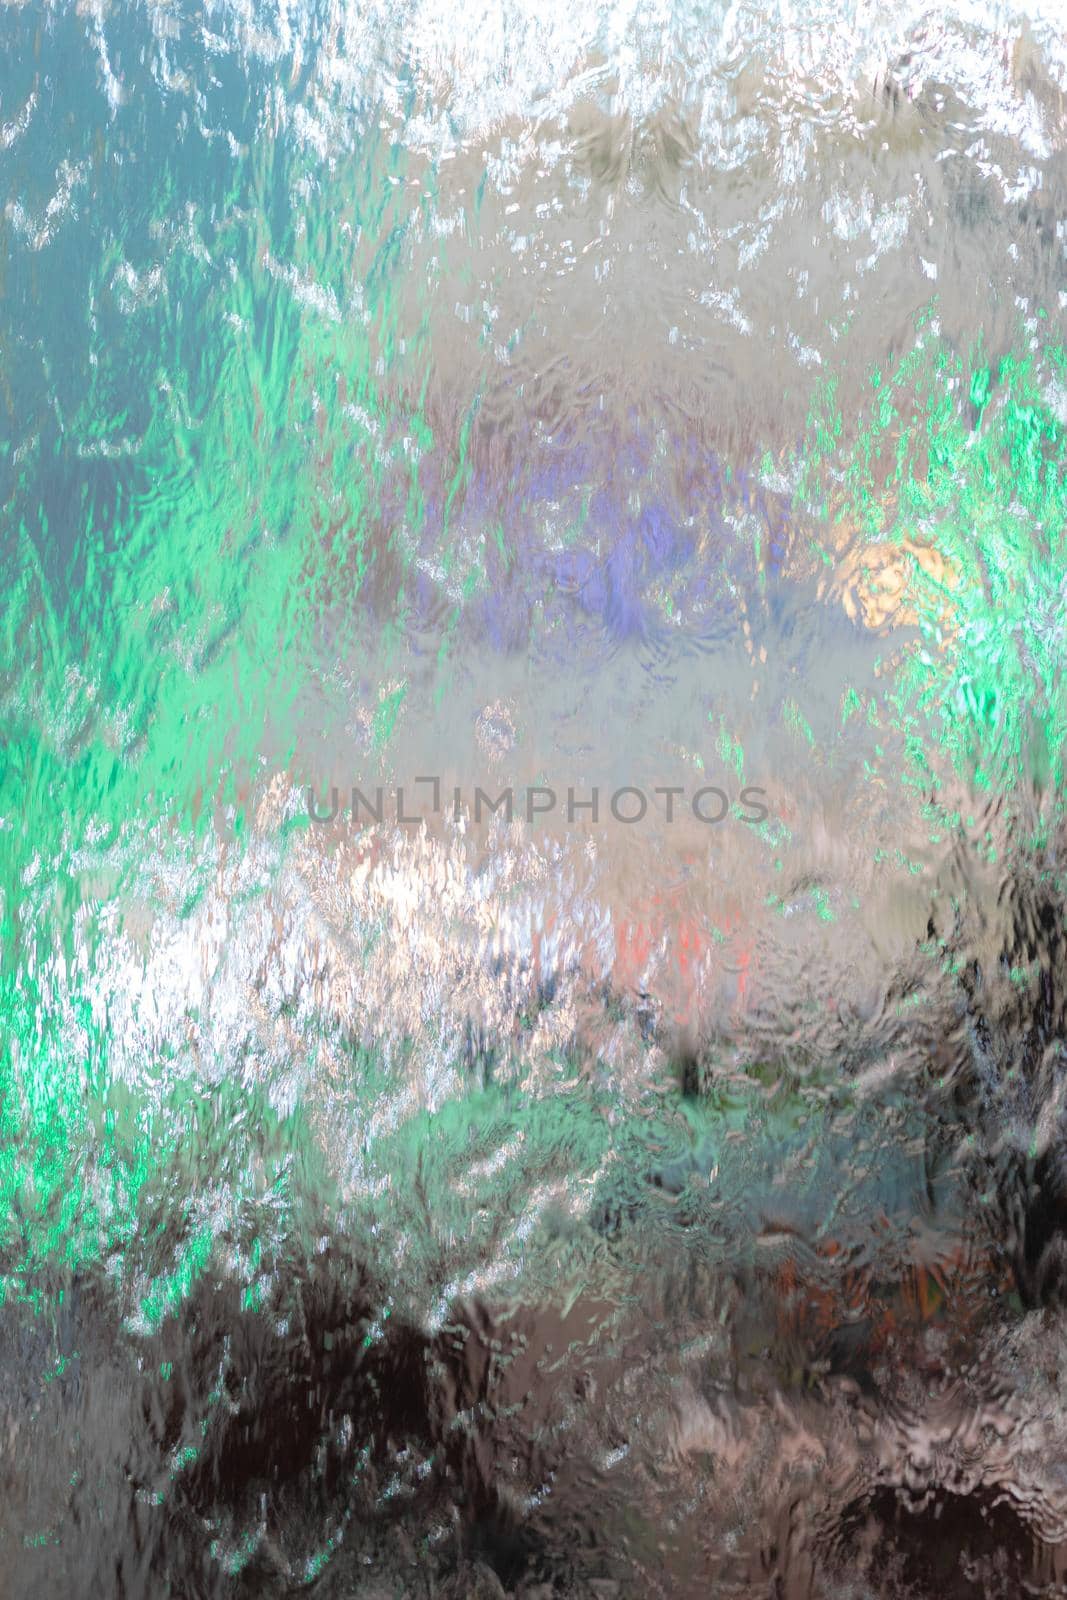 Water flows on the glass background by domonite